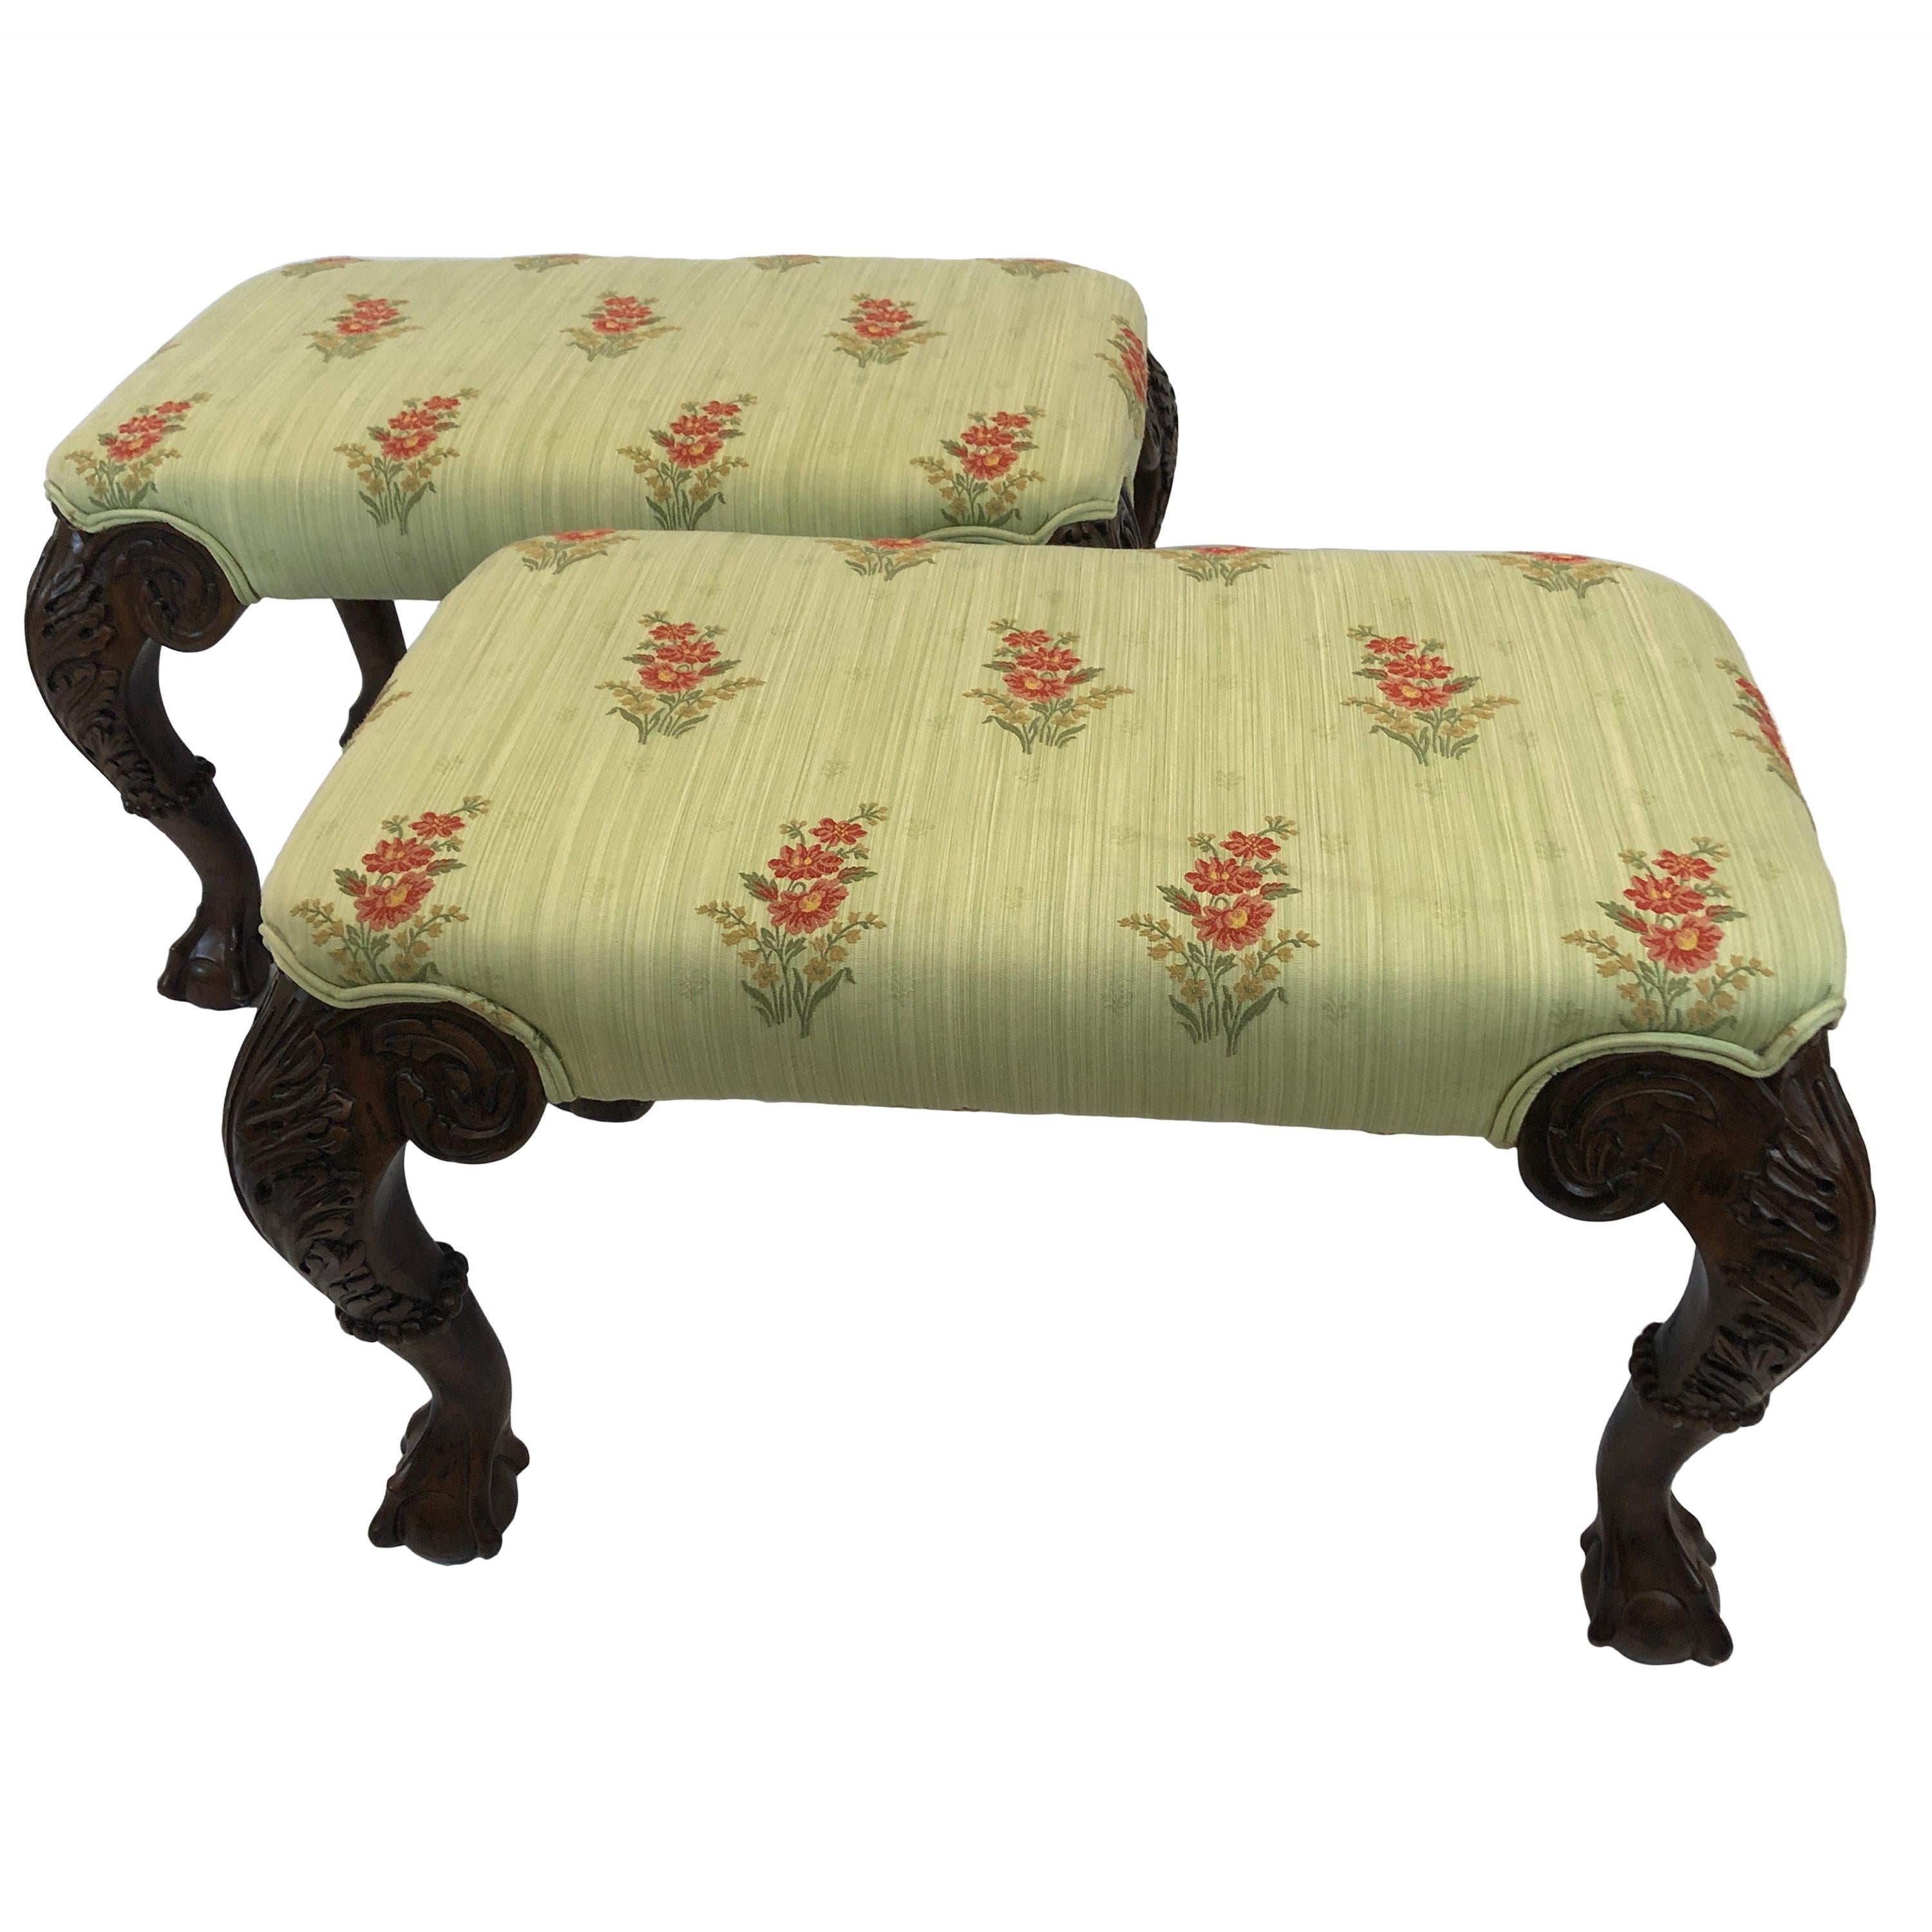 Pair of Beautifully Carved and Upholstered Benches